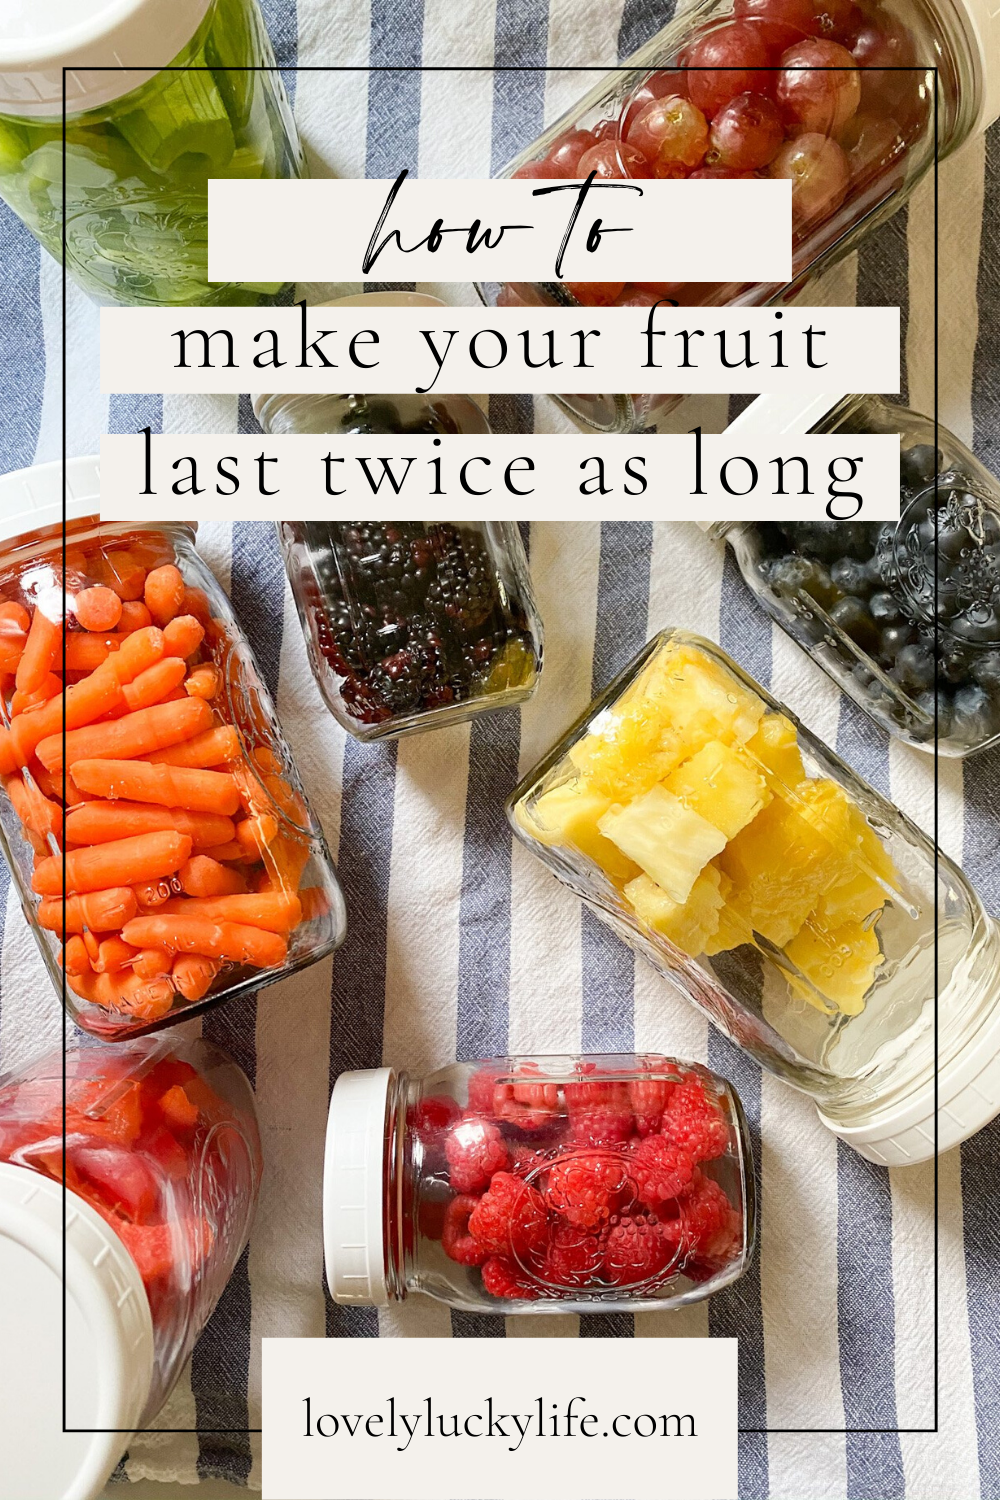 How To Make Your Fruit Last Twice As Long - Lovely Lucky Life